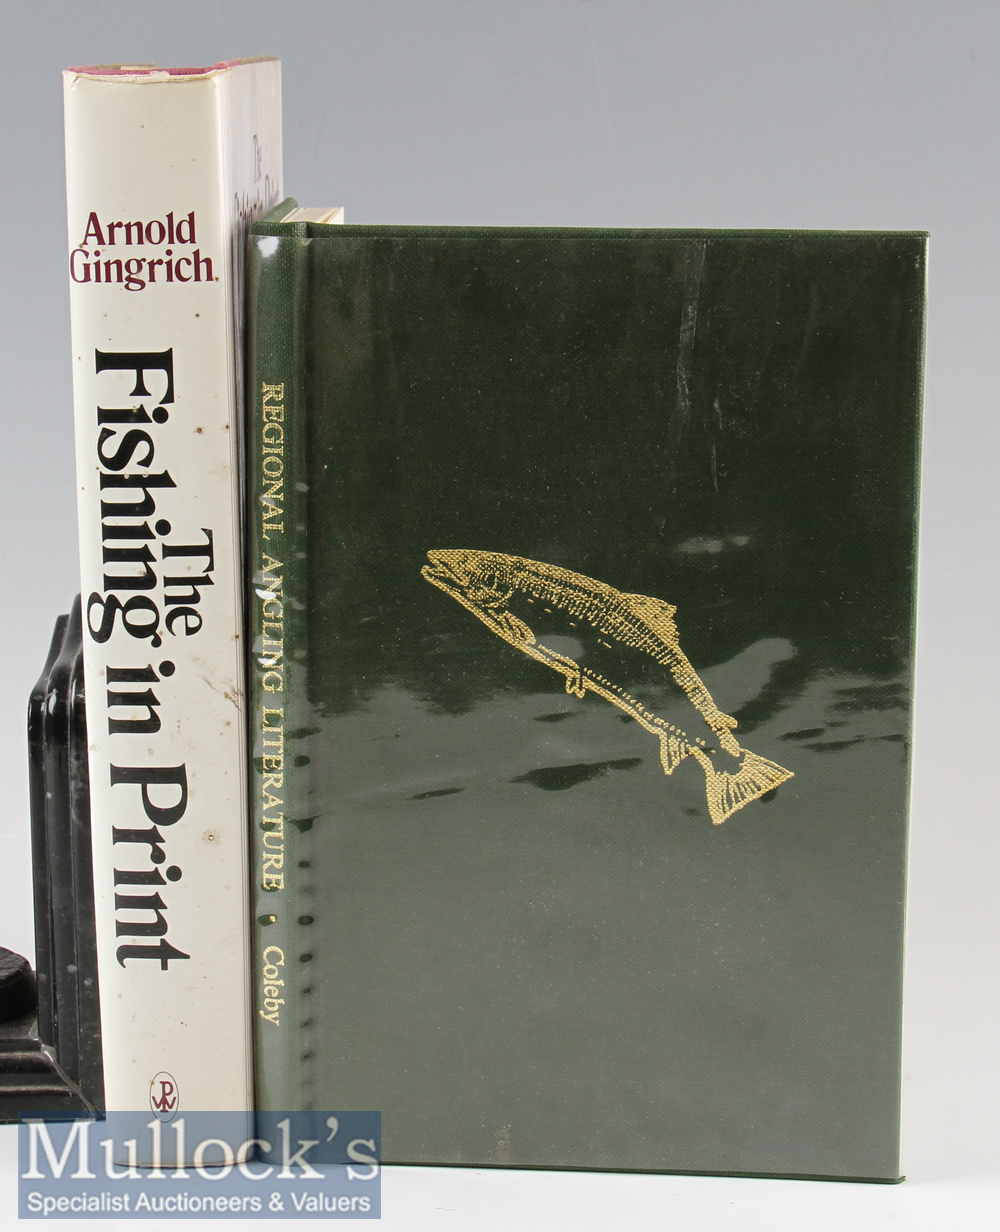 Gingrich, Arnold – The Fishing in Print, a guided tour through five centuries of angling literature,